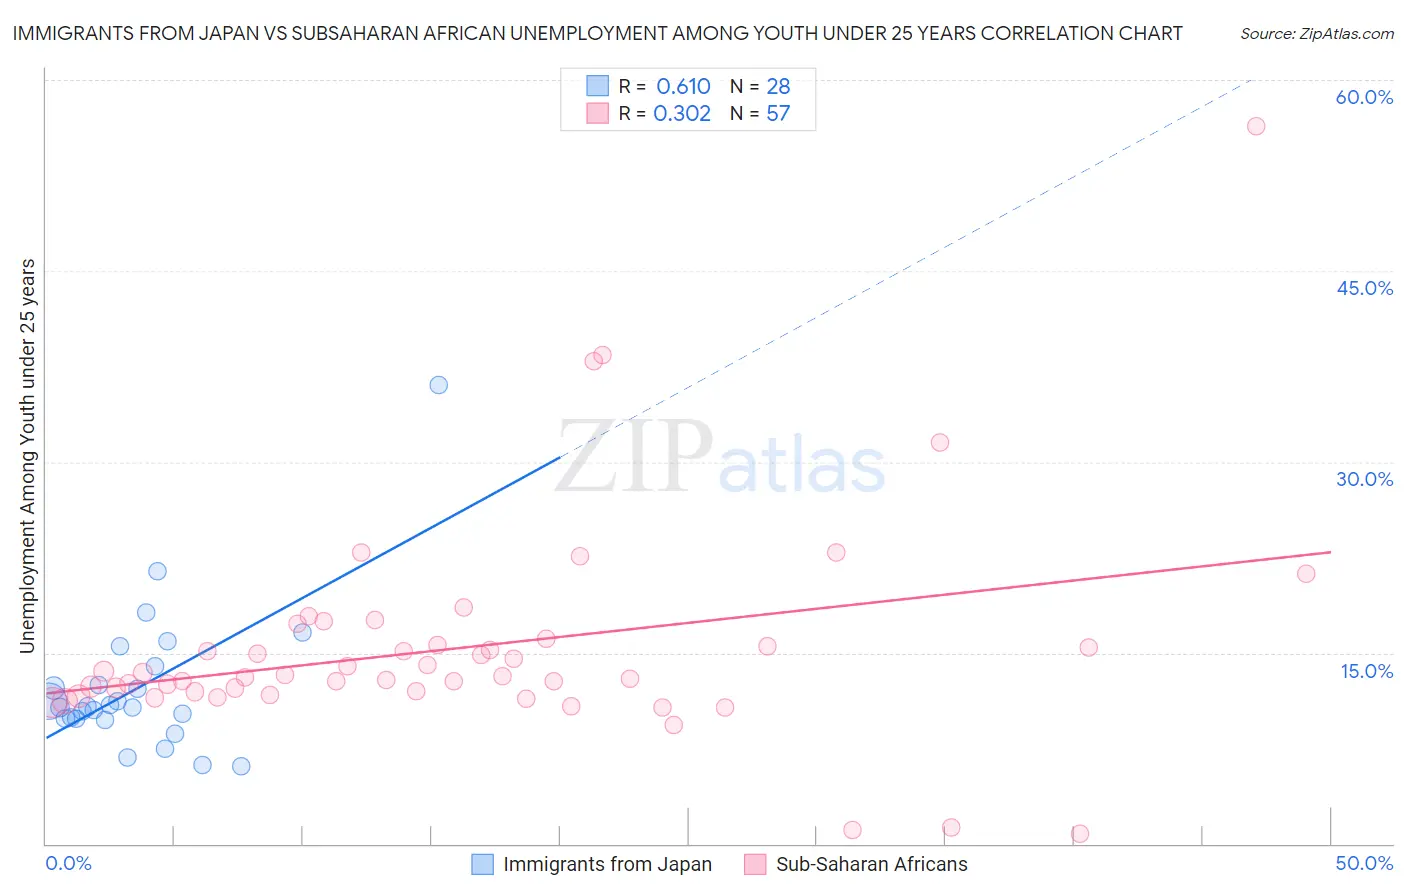 Immigrants from Japan vs Subsaharan African Unemployment Among Youth under 25 years